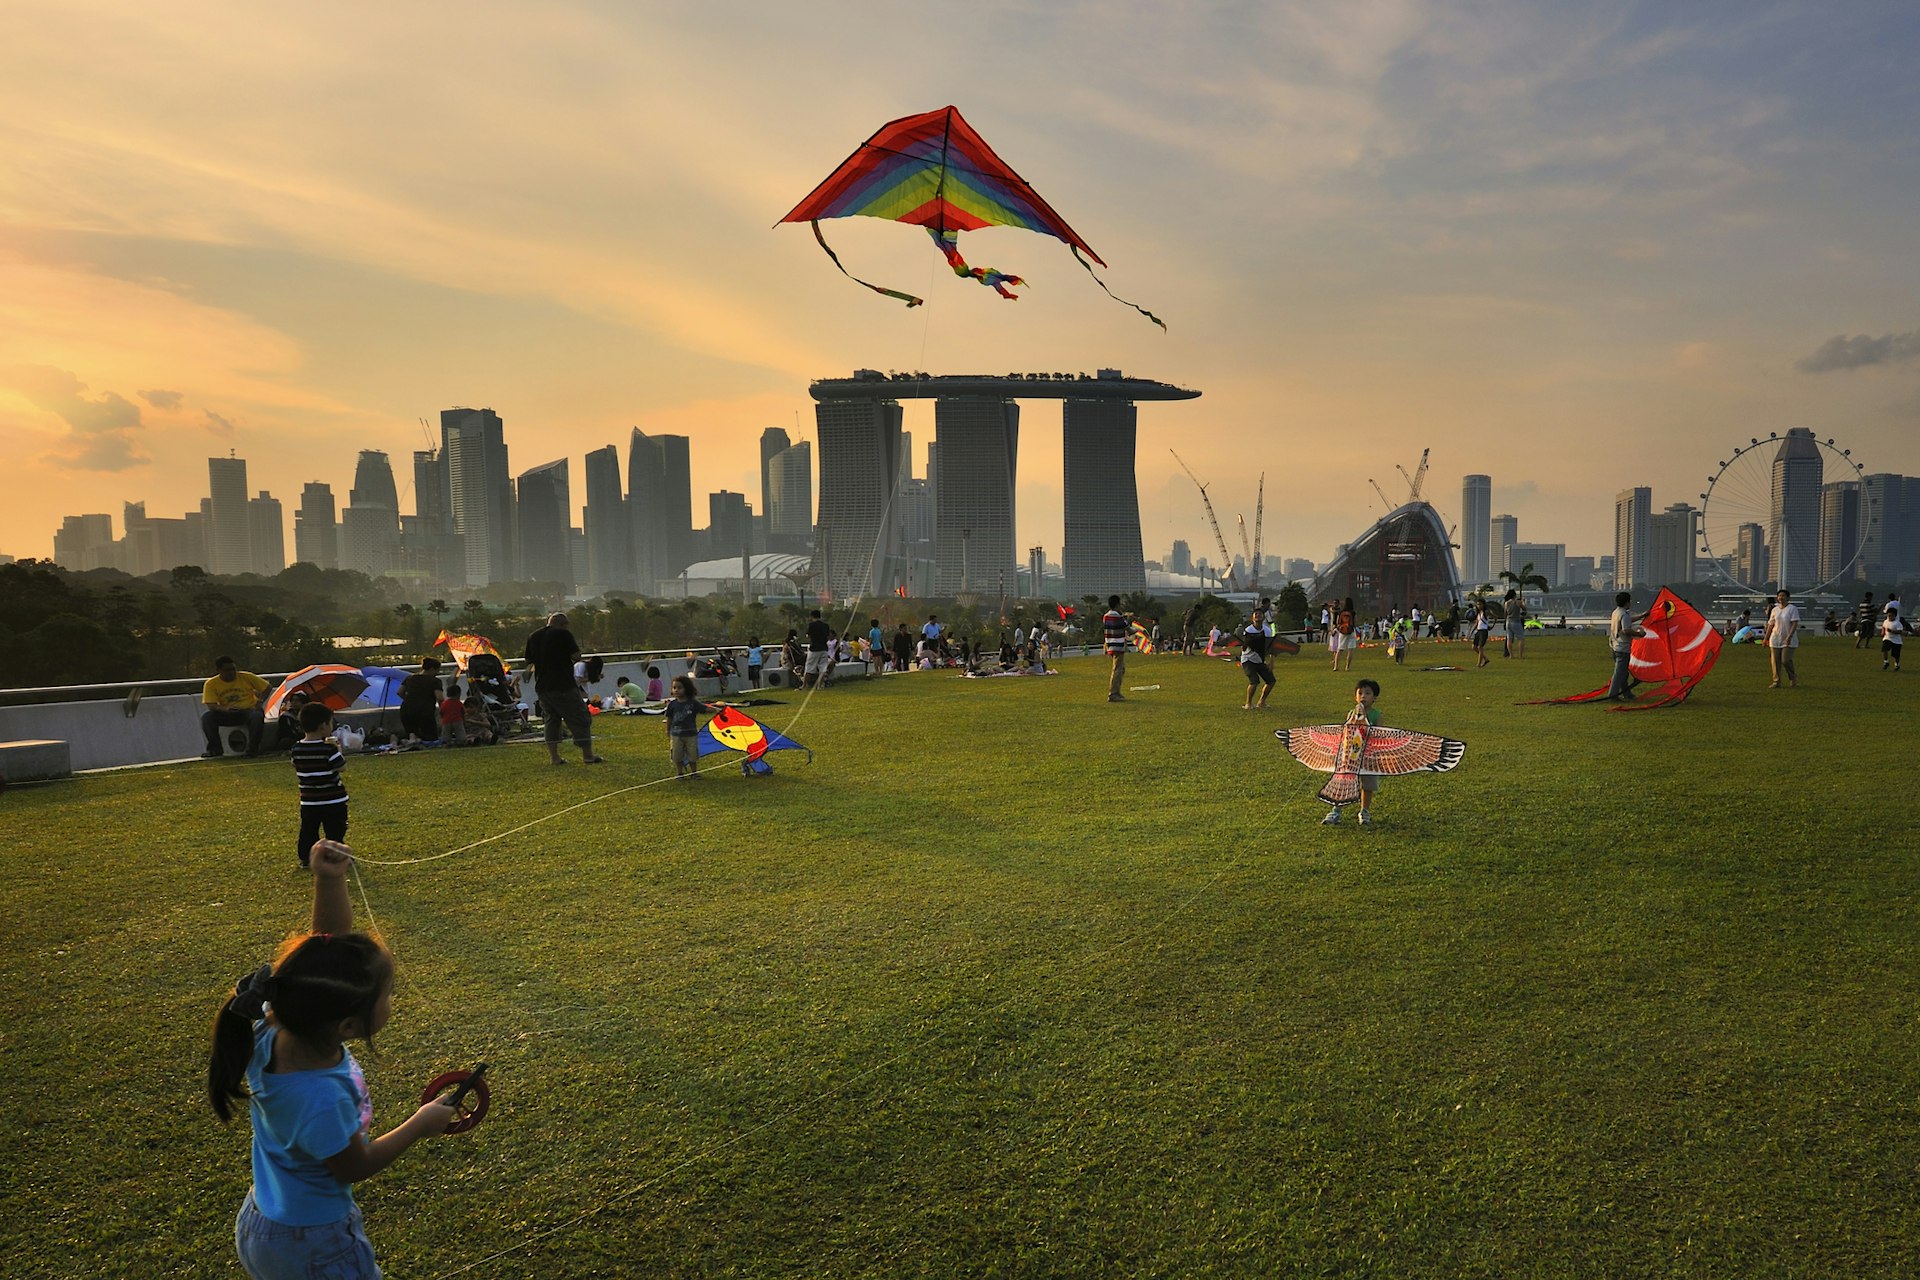 People flying kites at sunset in front of the Marina Bay Sands and the Singapore skyline 